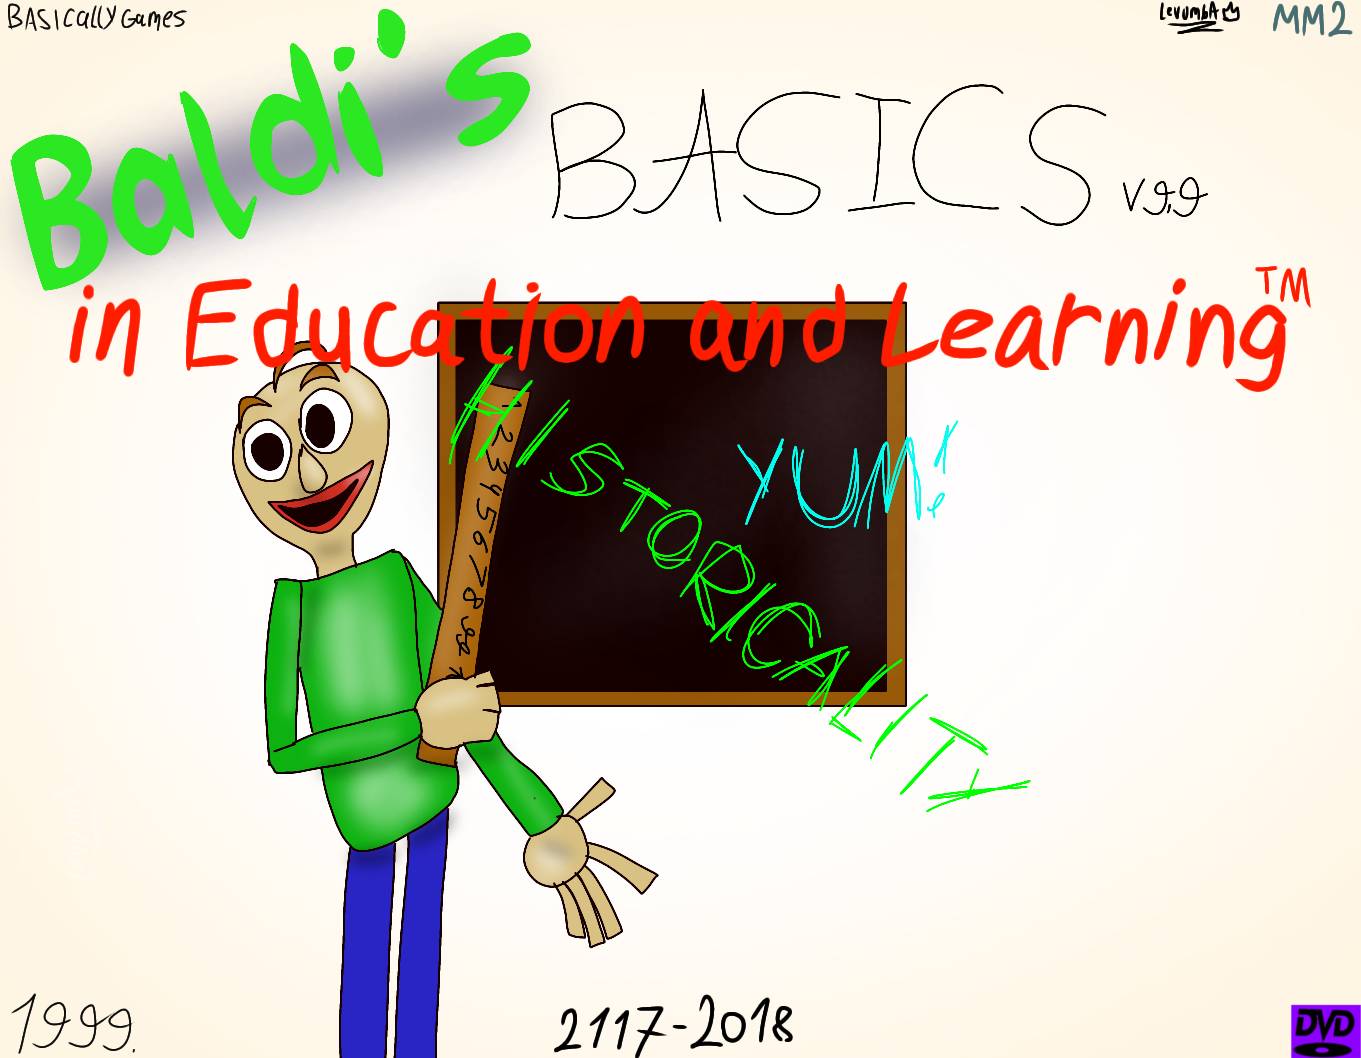 Baldi's Basics In Education And Learning! by VoidOfLOVE on DeviantArt